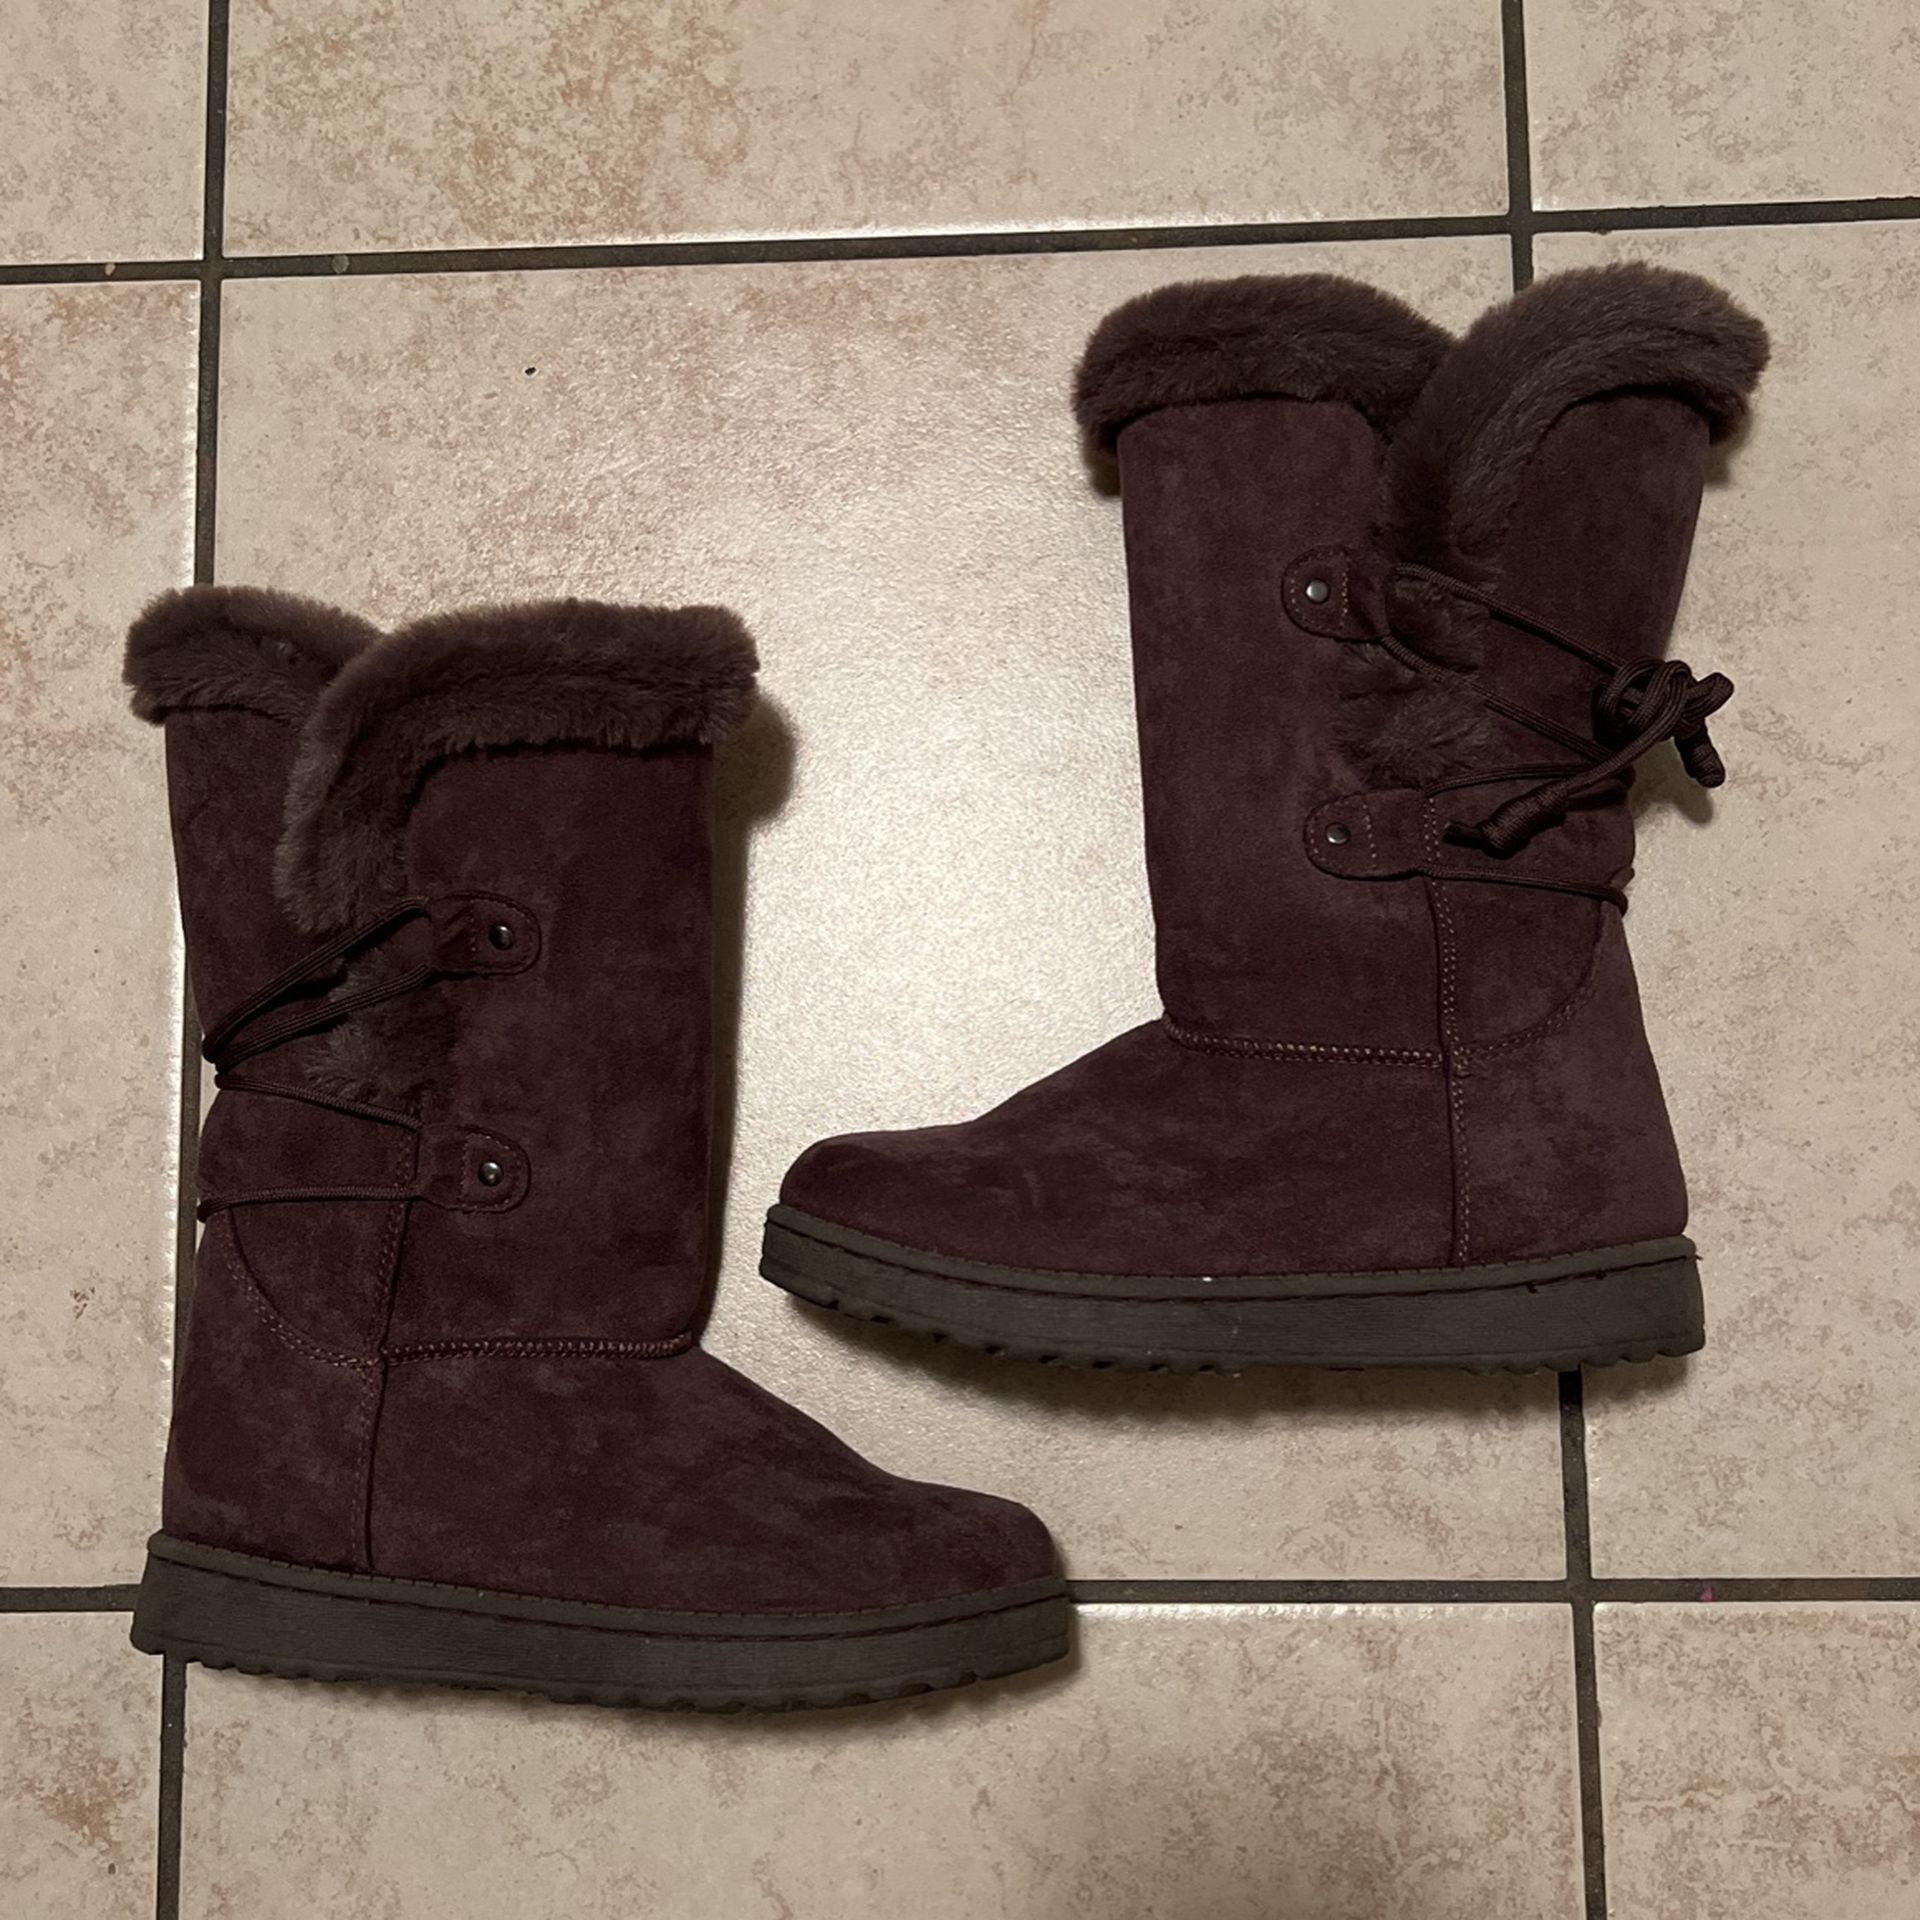 $20 Boots